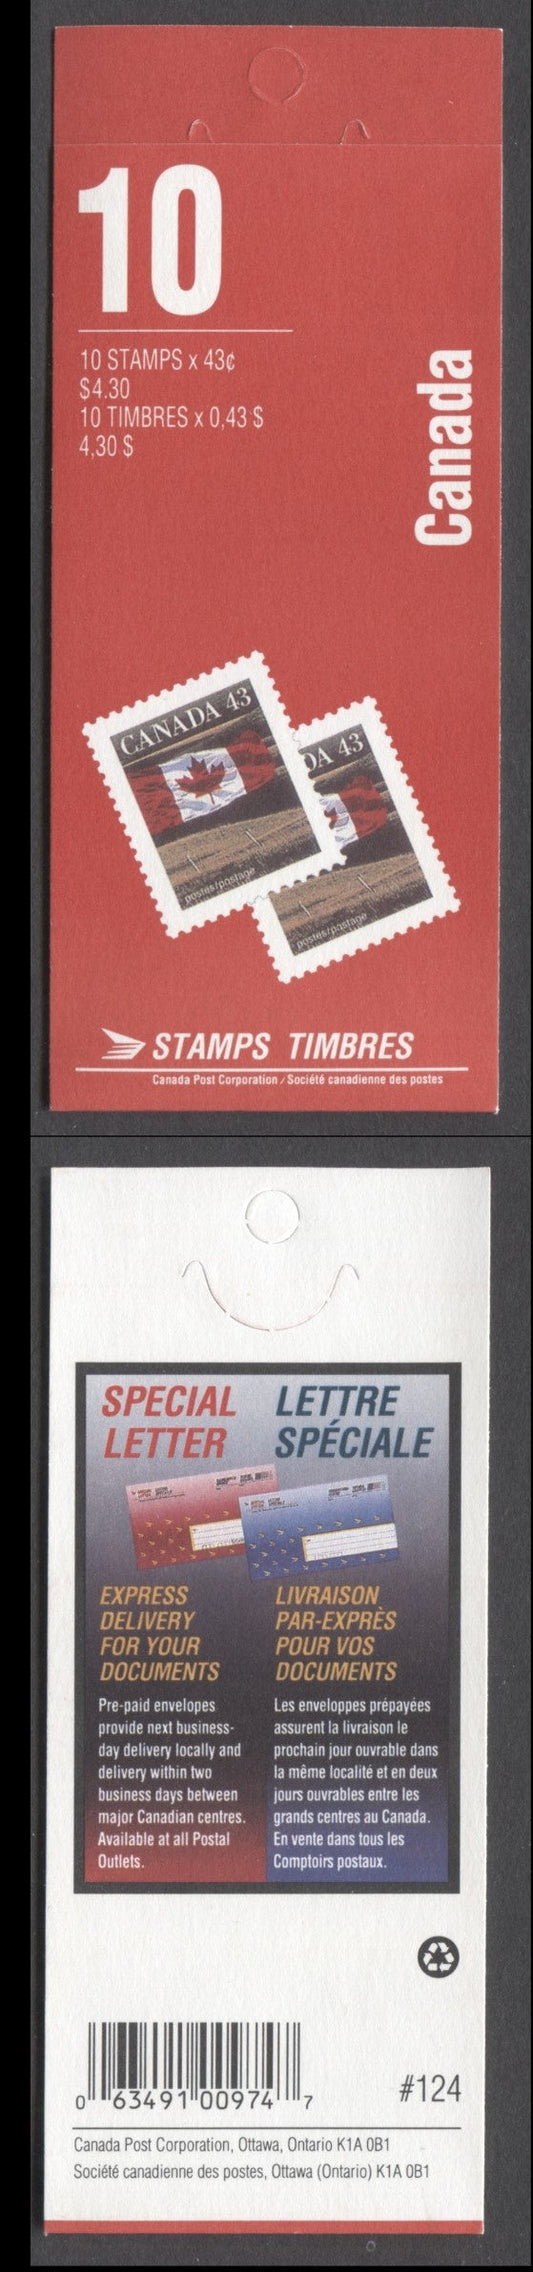 Lot 86 Canada #BK153a 1992-1994 Definitive Issue, A 43c Multicolored Booklet, Sealed, HB Cover Cover Stock, Coated Papers Paper, 2 Stamps' & 'Special Letters' Covers, AP Printing, 'Come Discover' on Inside Front